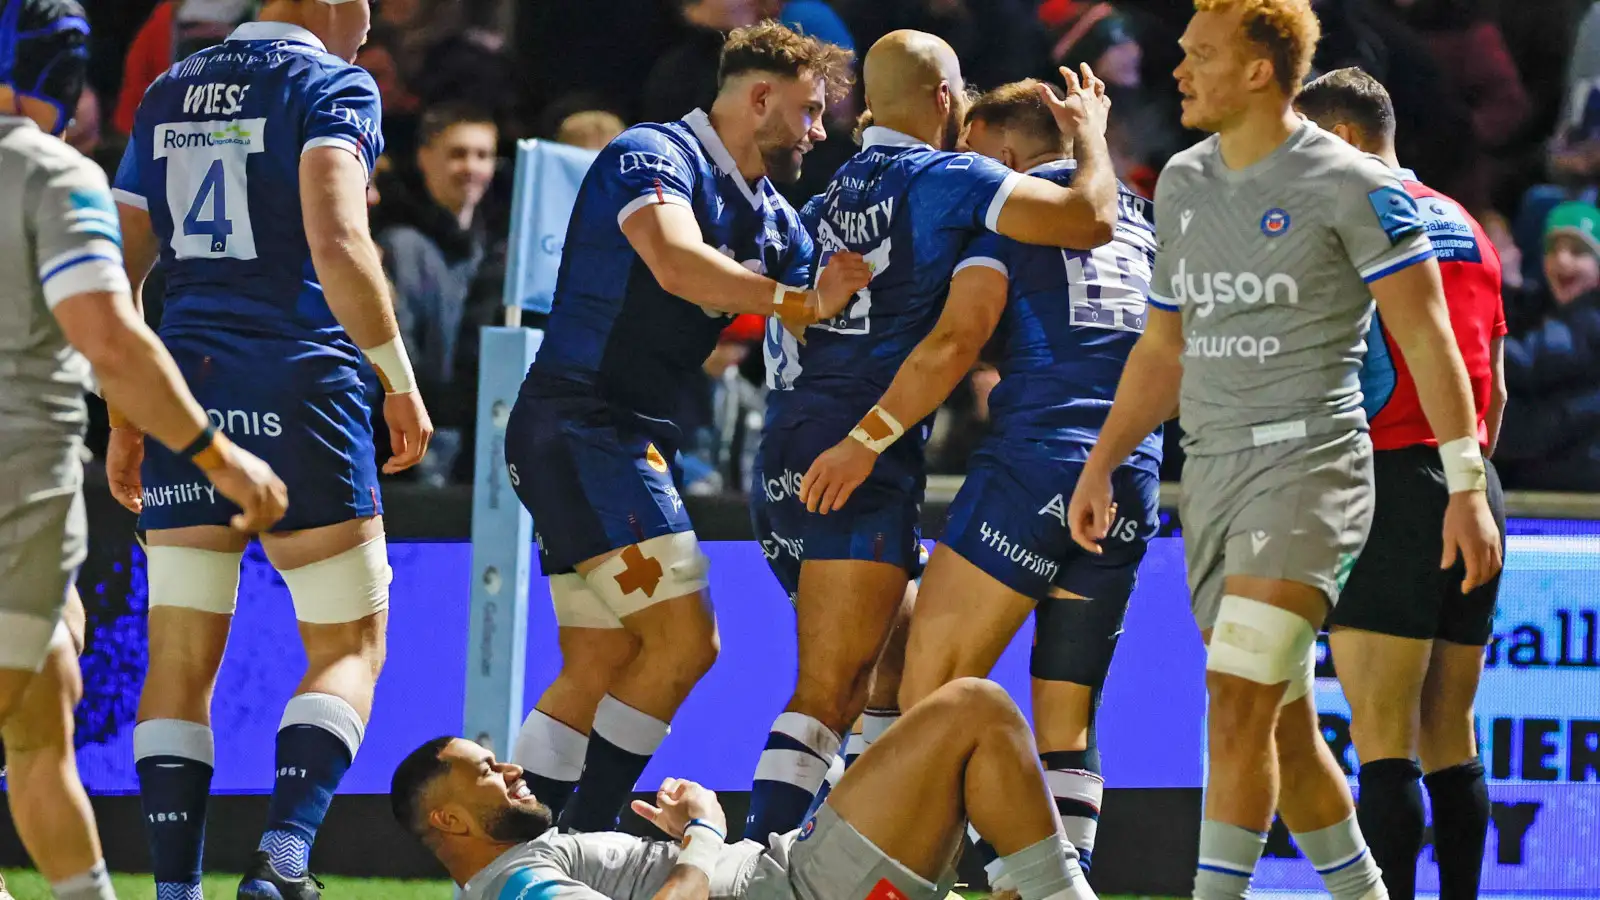 Premiership Arron Reed touched down with the clock in the red to help Sale Sharks to a dramatic 30-27 triumph over an improving Bath side on Friday.